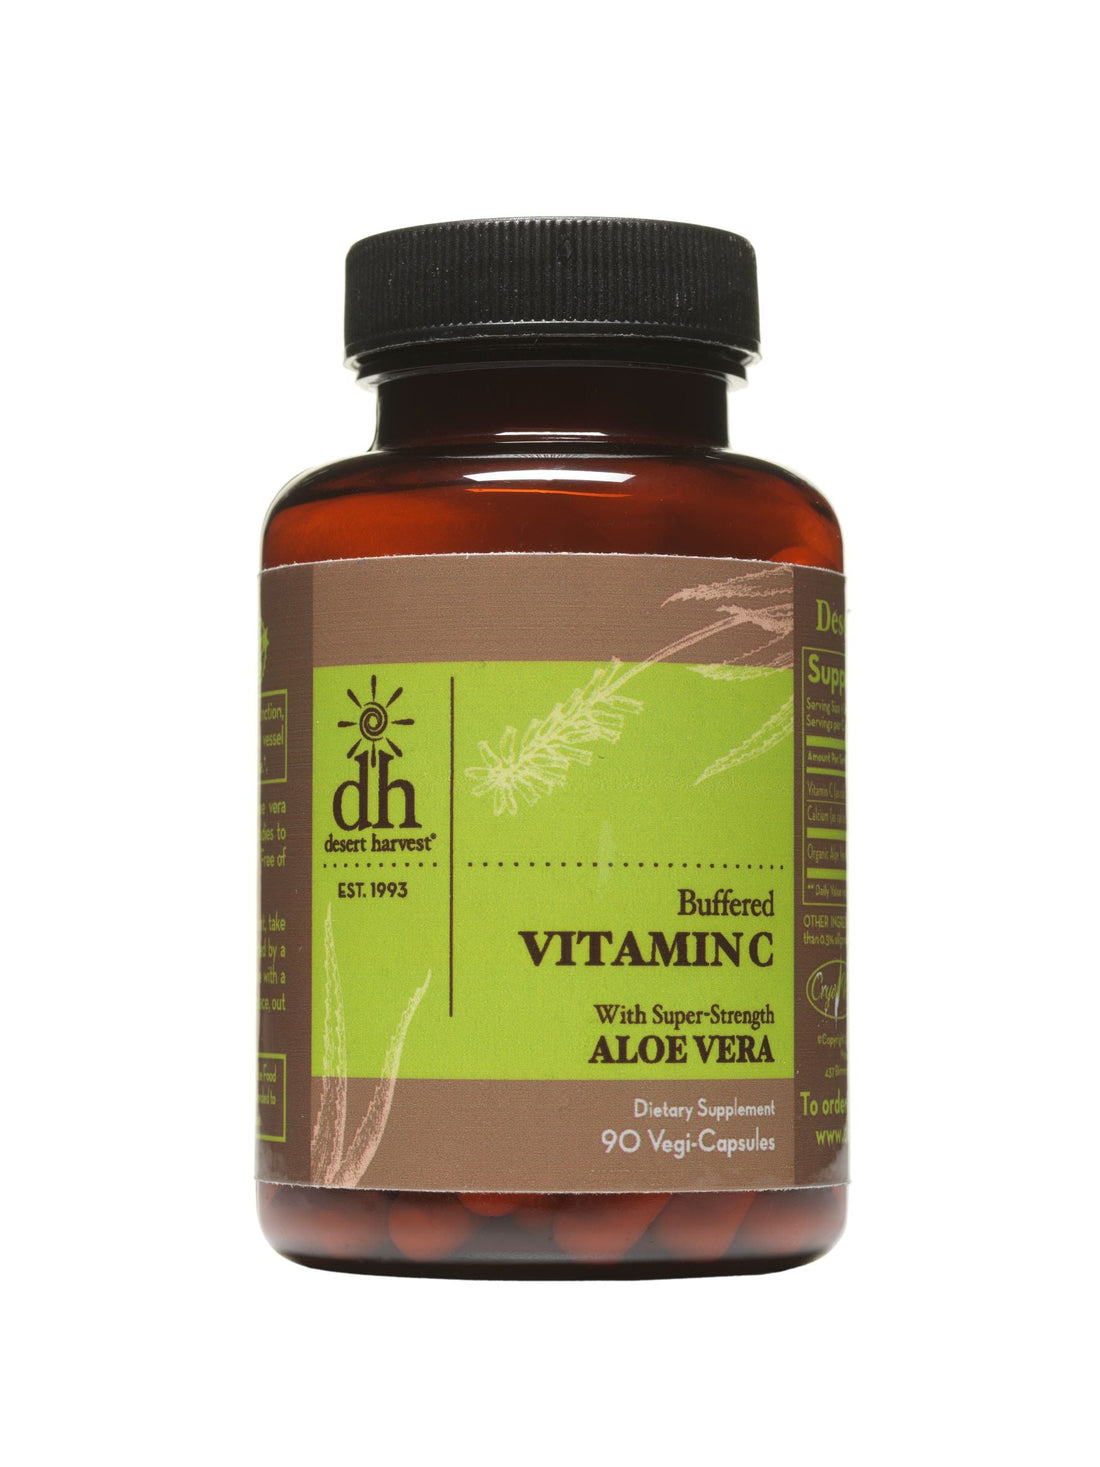 Buffered Vitamin C | with Super-Strength Aloe Vera - 90 Capsules Oral Supplements Desert Harvest 